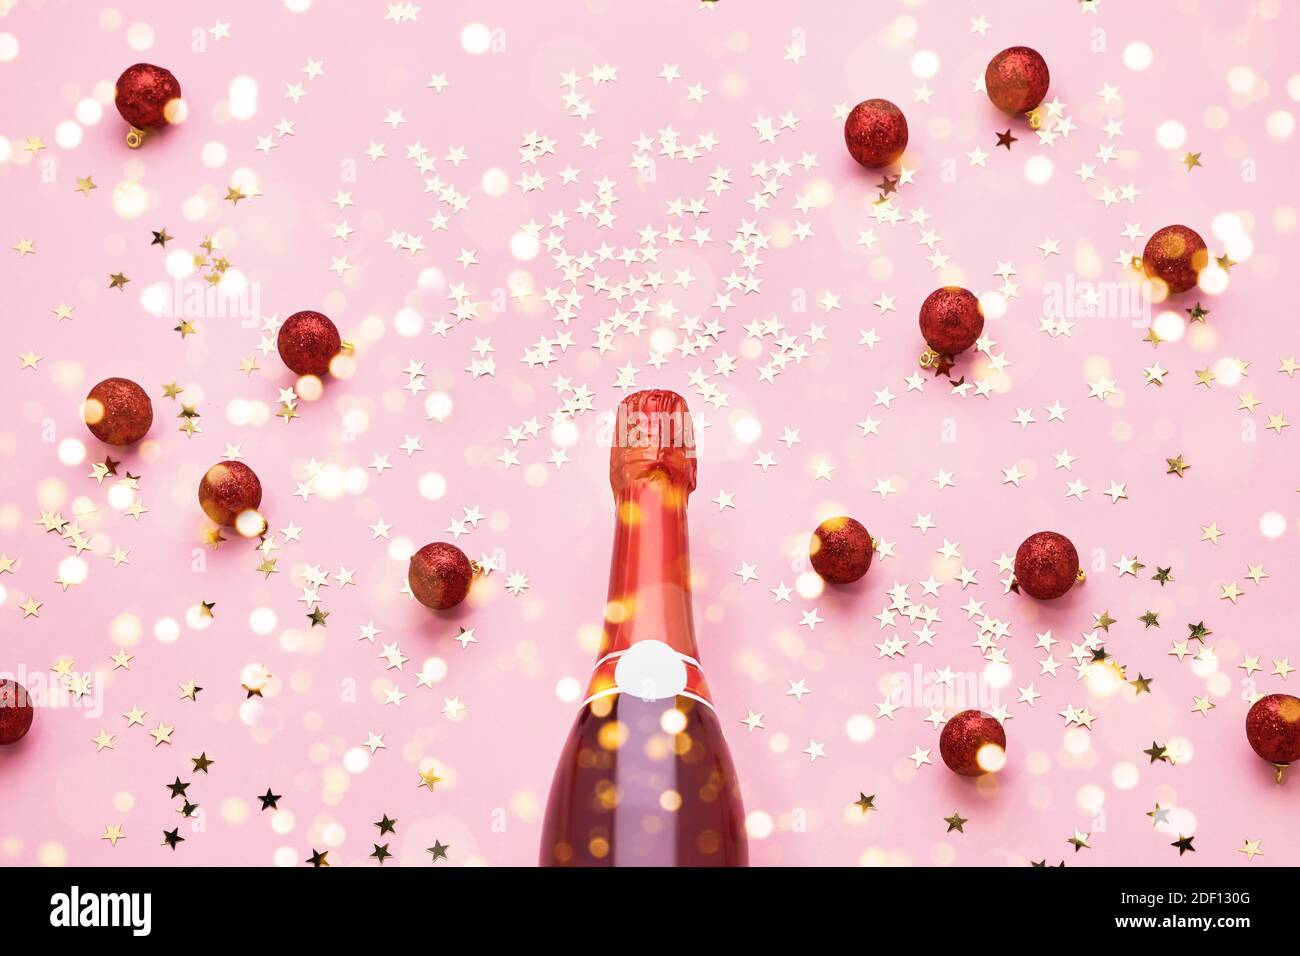 Red Champagne bottle with red Christmas decoration on pink background. Top view, copy space Stock Photo